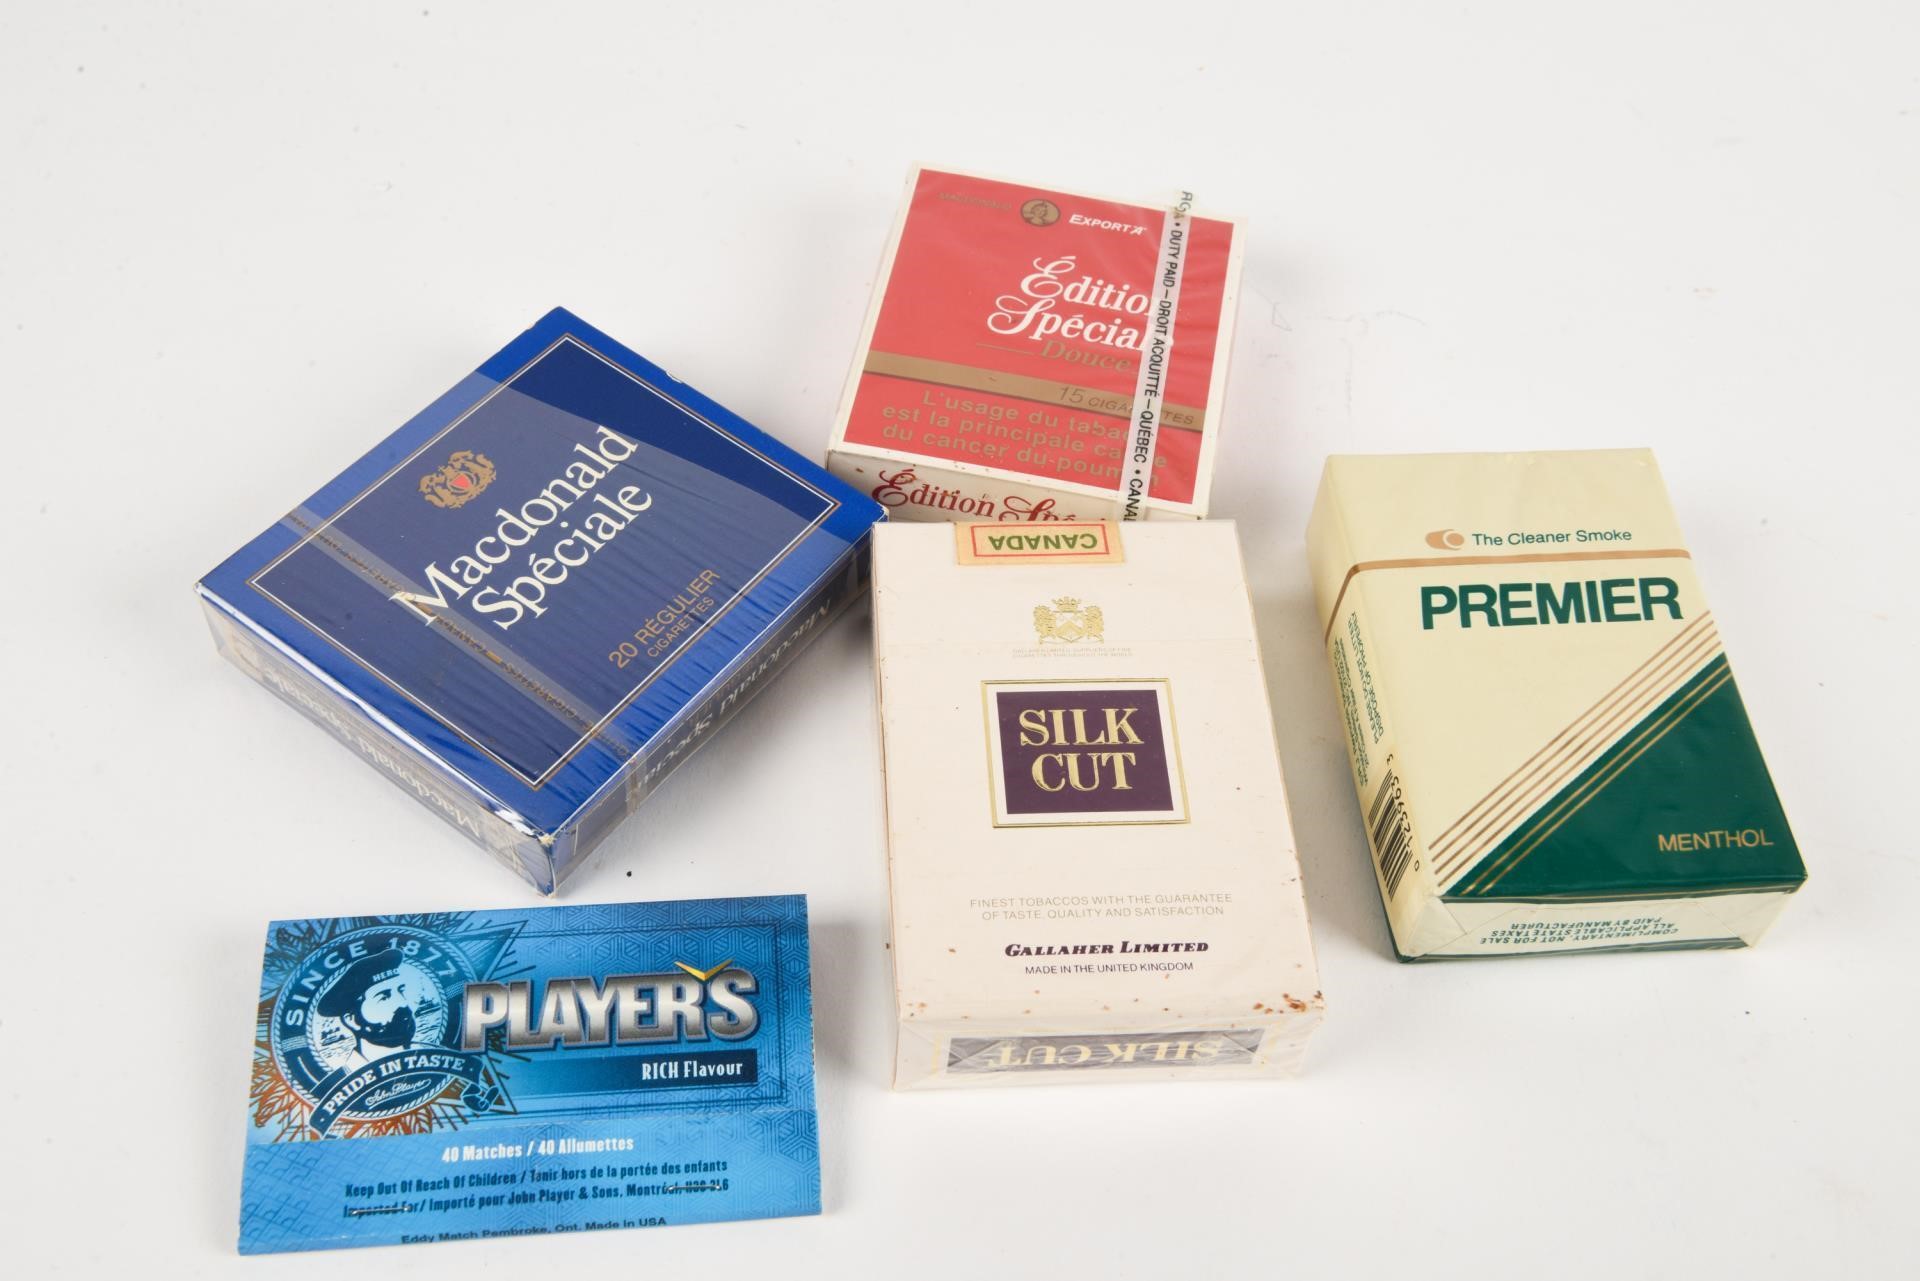 LOT OF 5 CIGARETTE COLLECTOR PACKAGES +